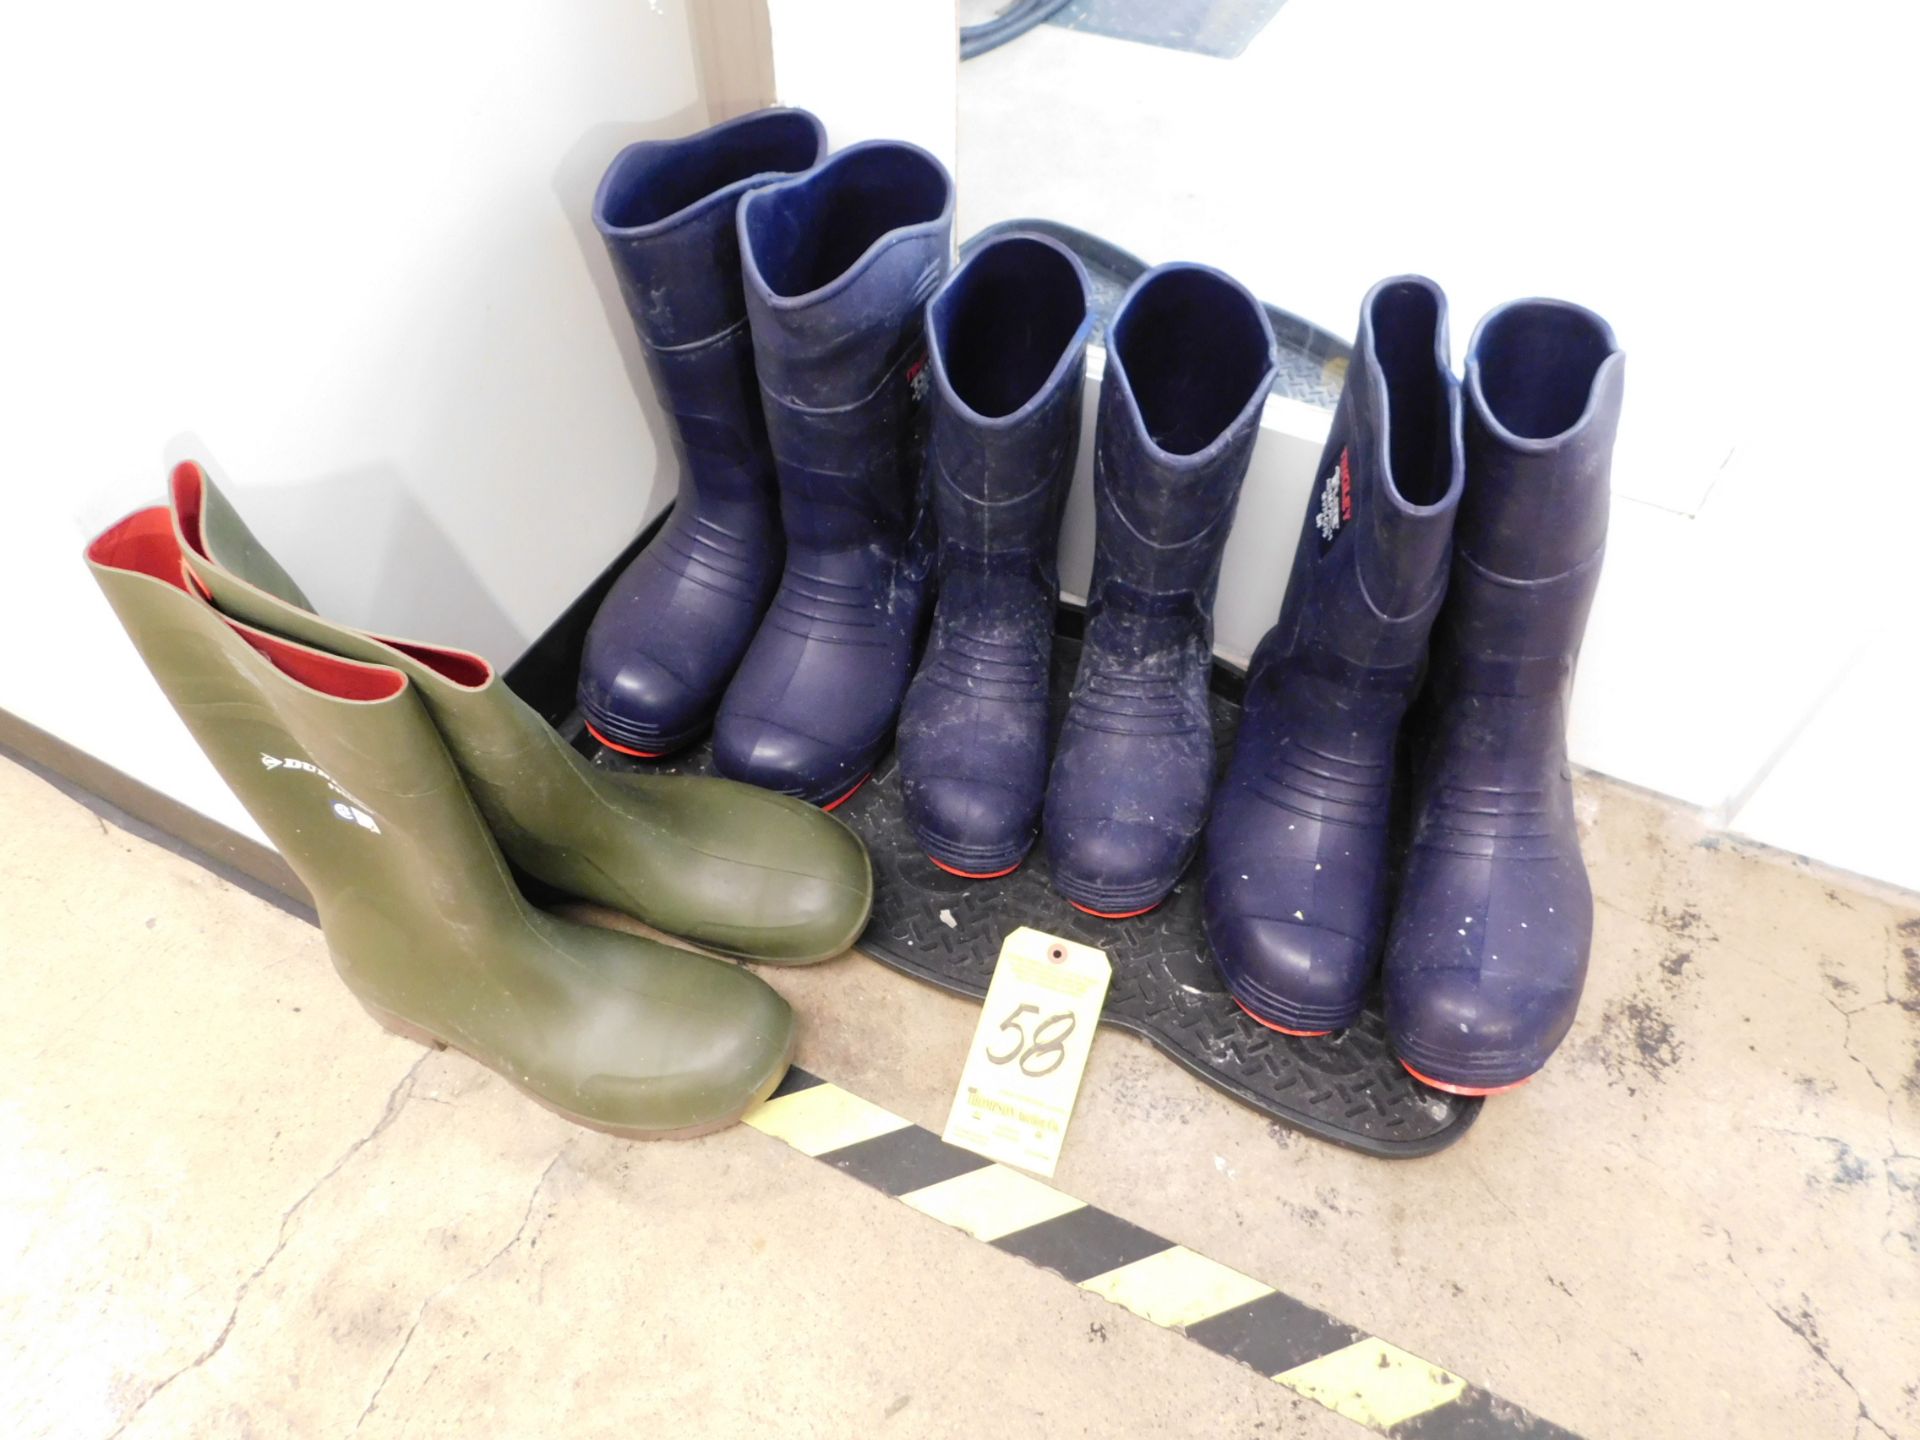 (3) Pairs of Tingley Rubber Non-Stick Boots, (1) Pair Dunlop Rubber Boots